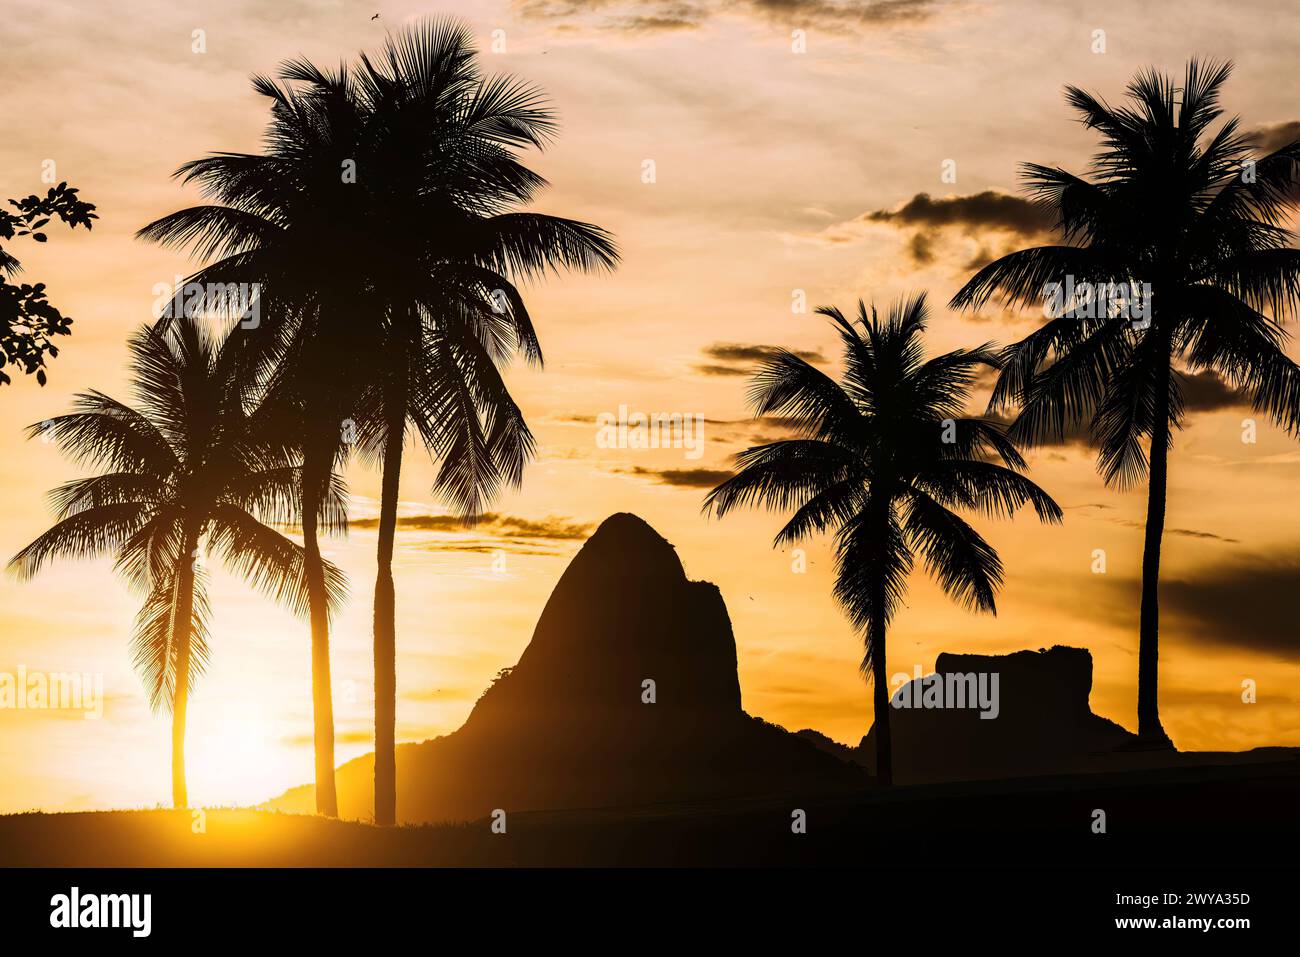 Sunset with the iconic Two Brothers Mountains in the backgrounds with palm trees in the foreground, Rio de Janeiro, Brazil, South America Copyright: A Stock Photo